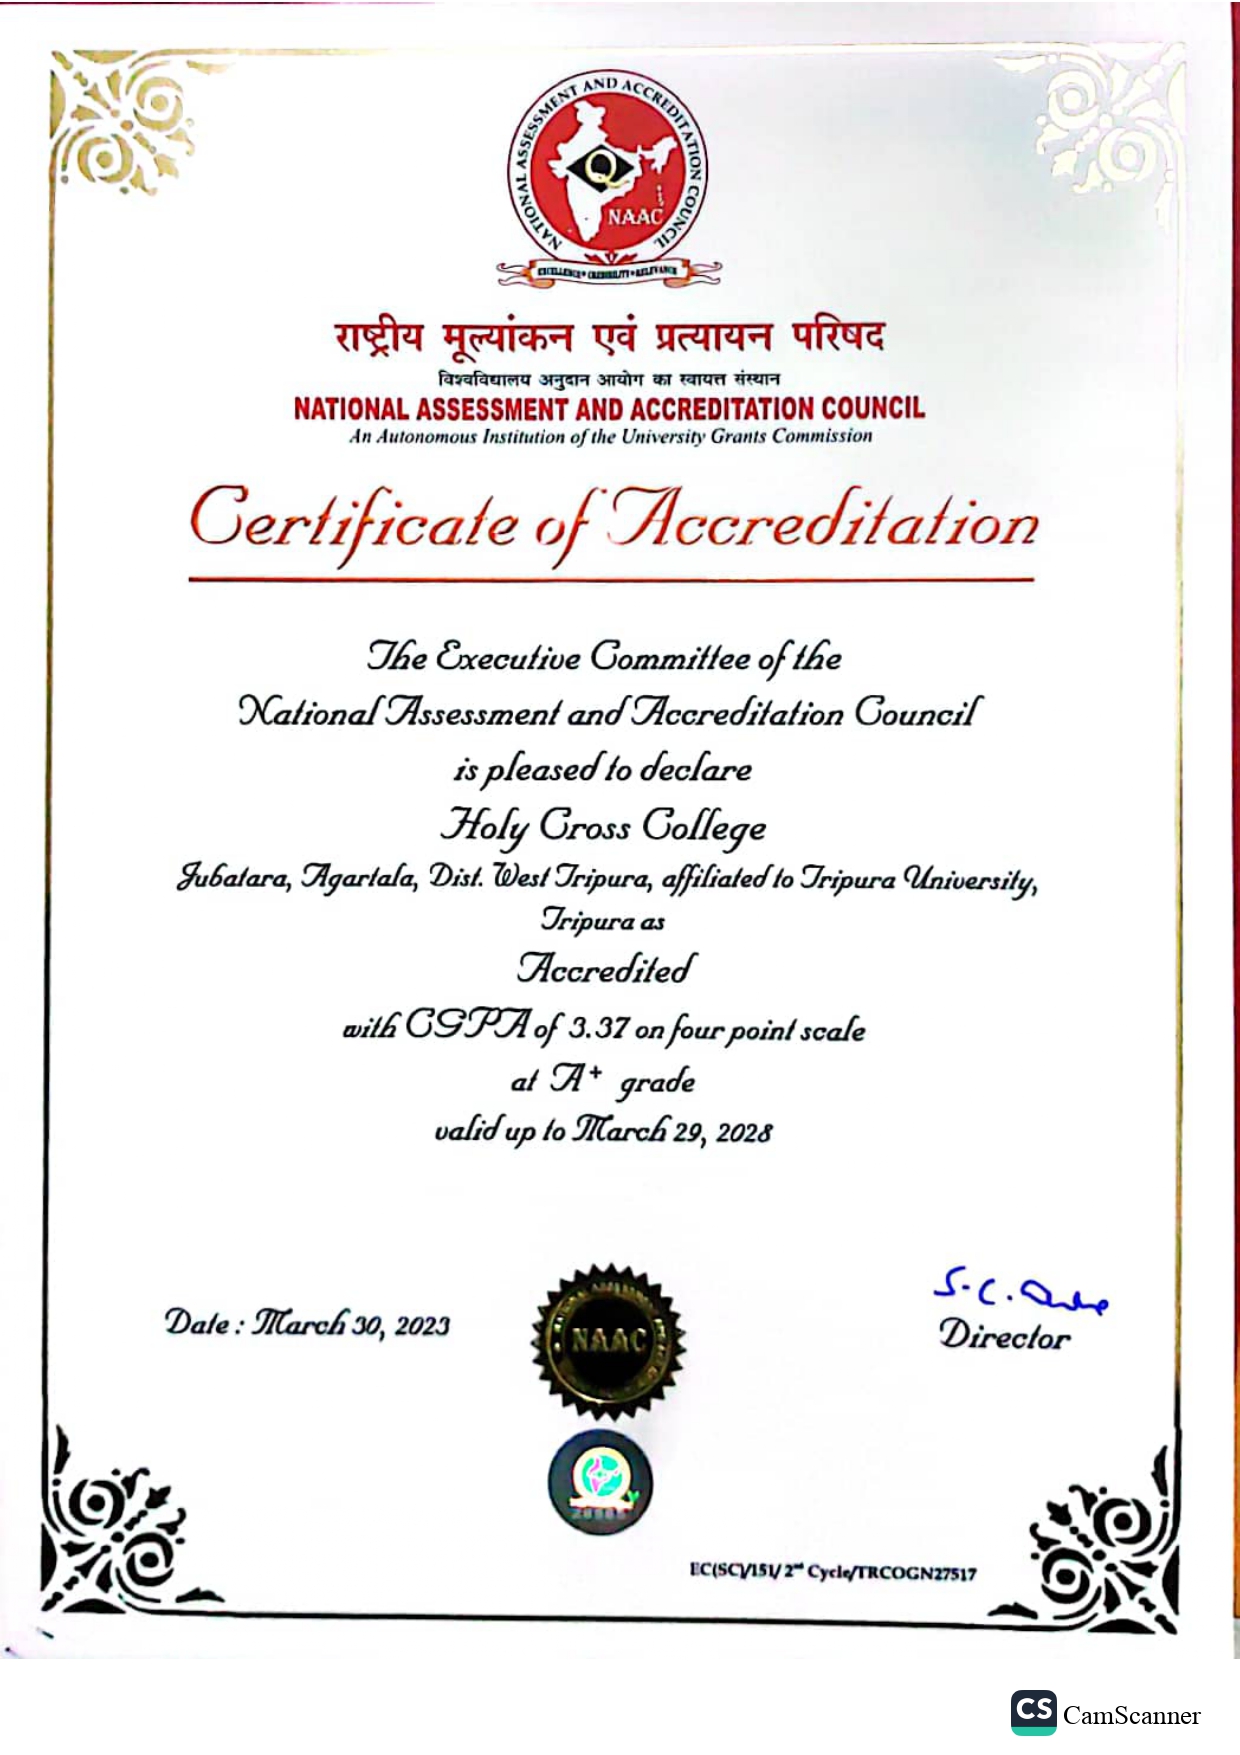 Holy Cross College NAAC Certificate